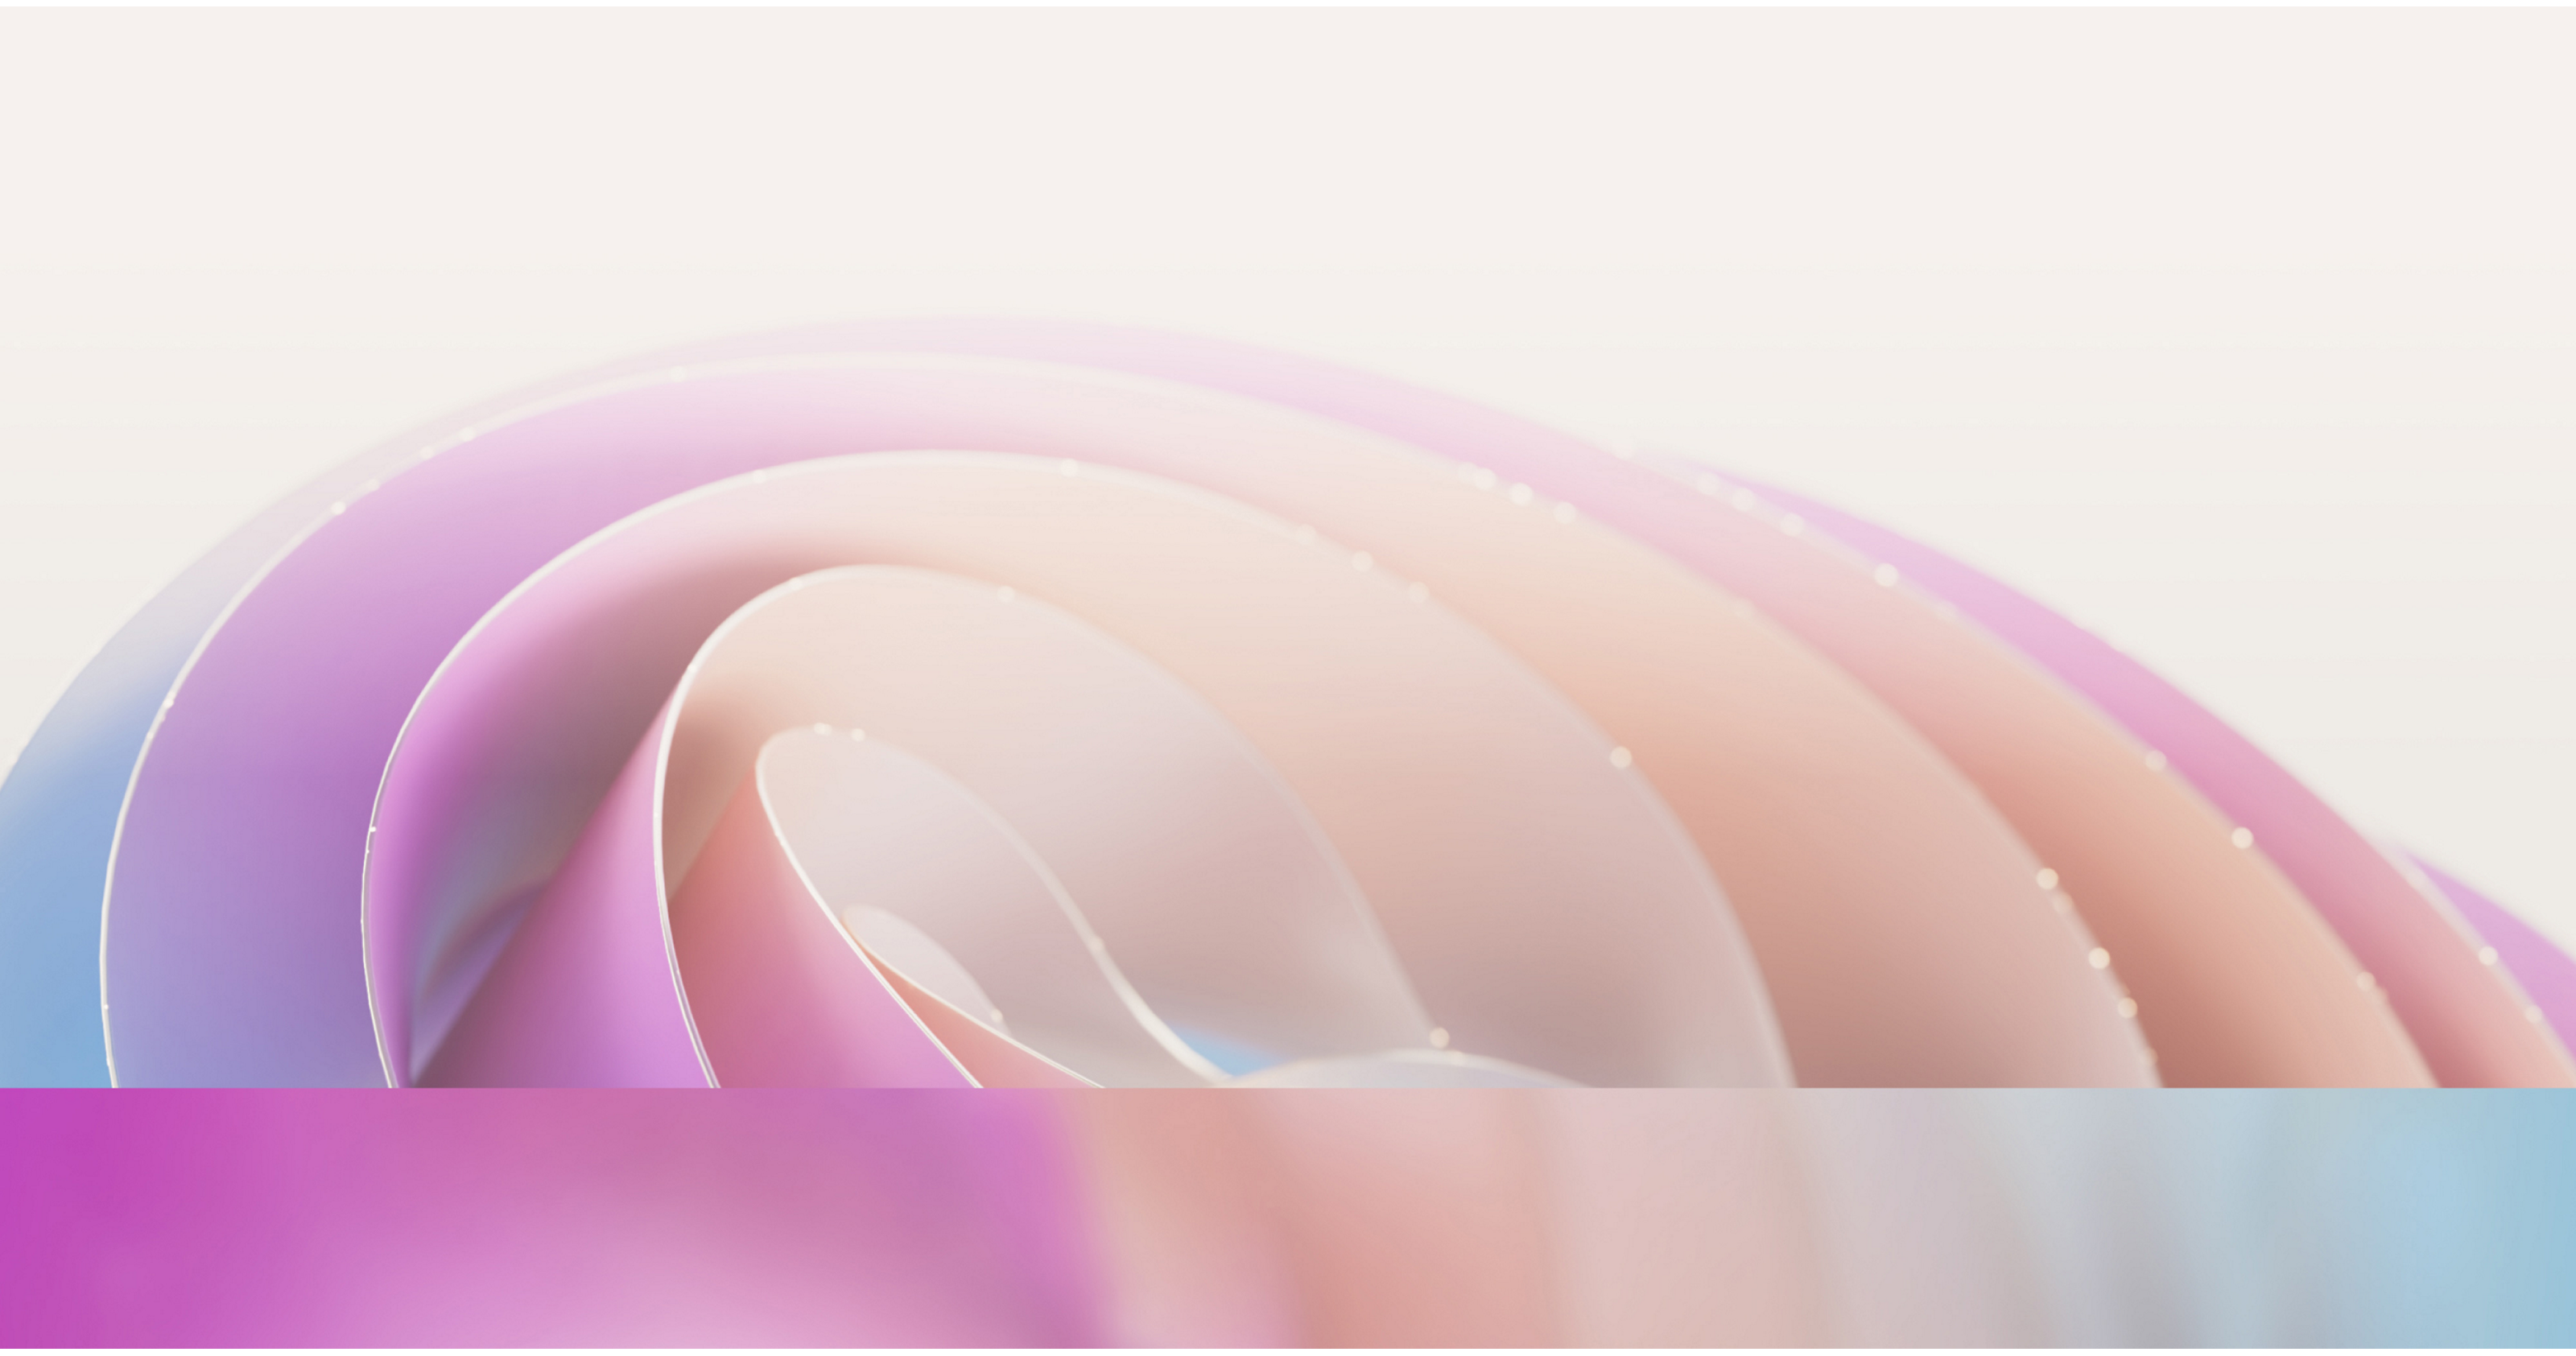 Abstract image featuring smooth, flowing curves in soft pink and purple hues with a subtle, light-diffusing effect.